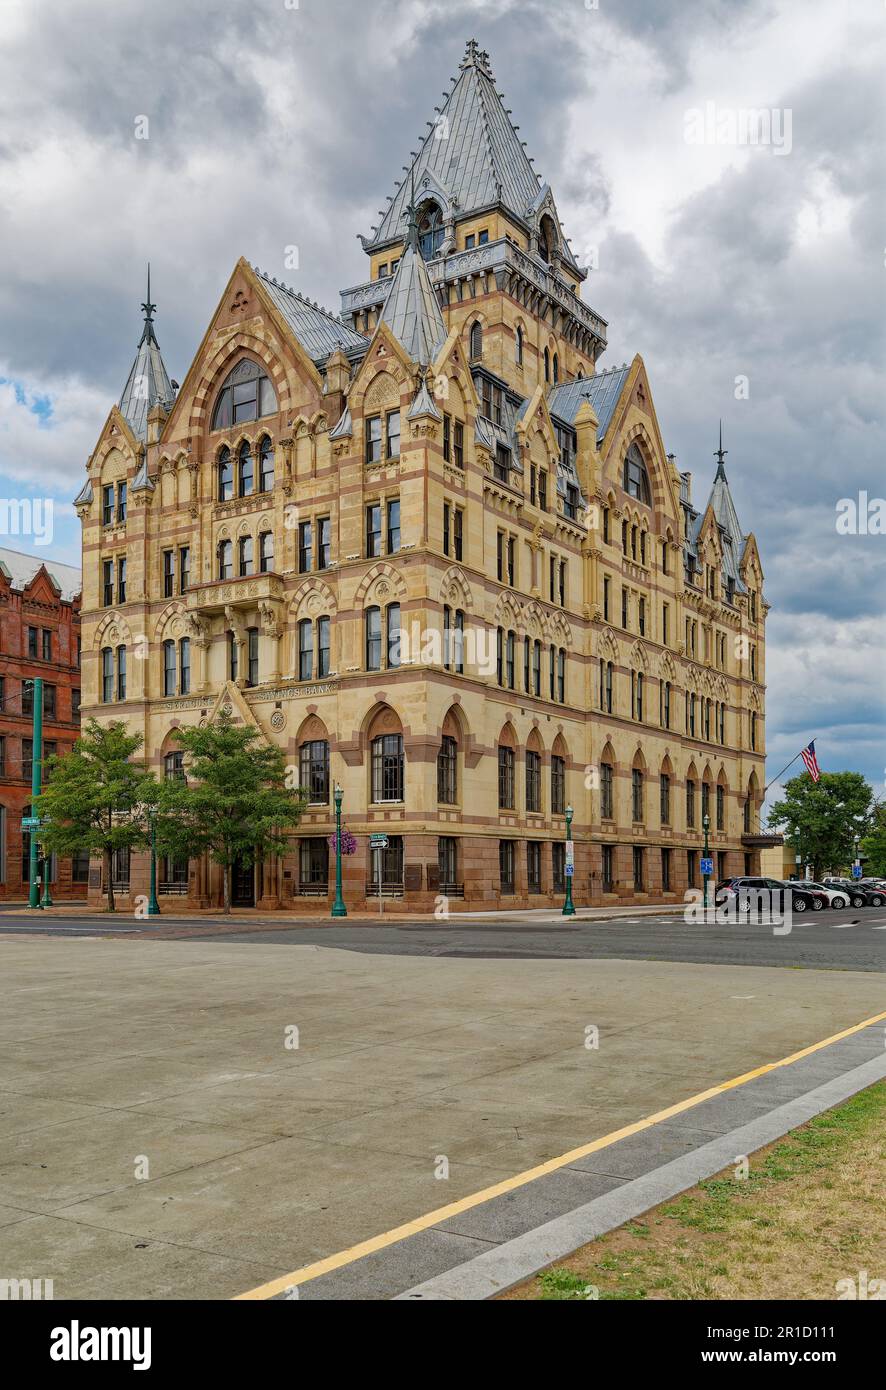 Bank of America now occupies the sandstone landmark Syracuse Savings Bank Building at Clinton Square, former path of Erie Canal. Stock Photo